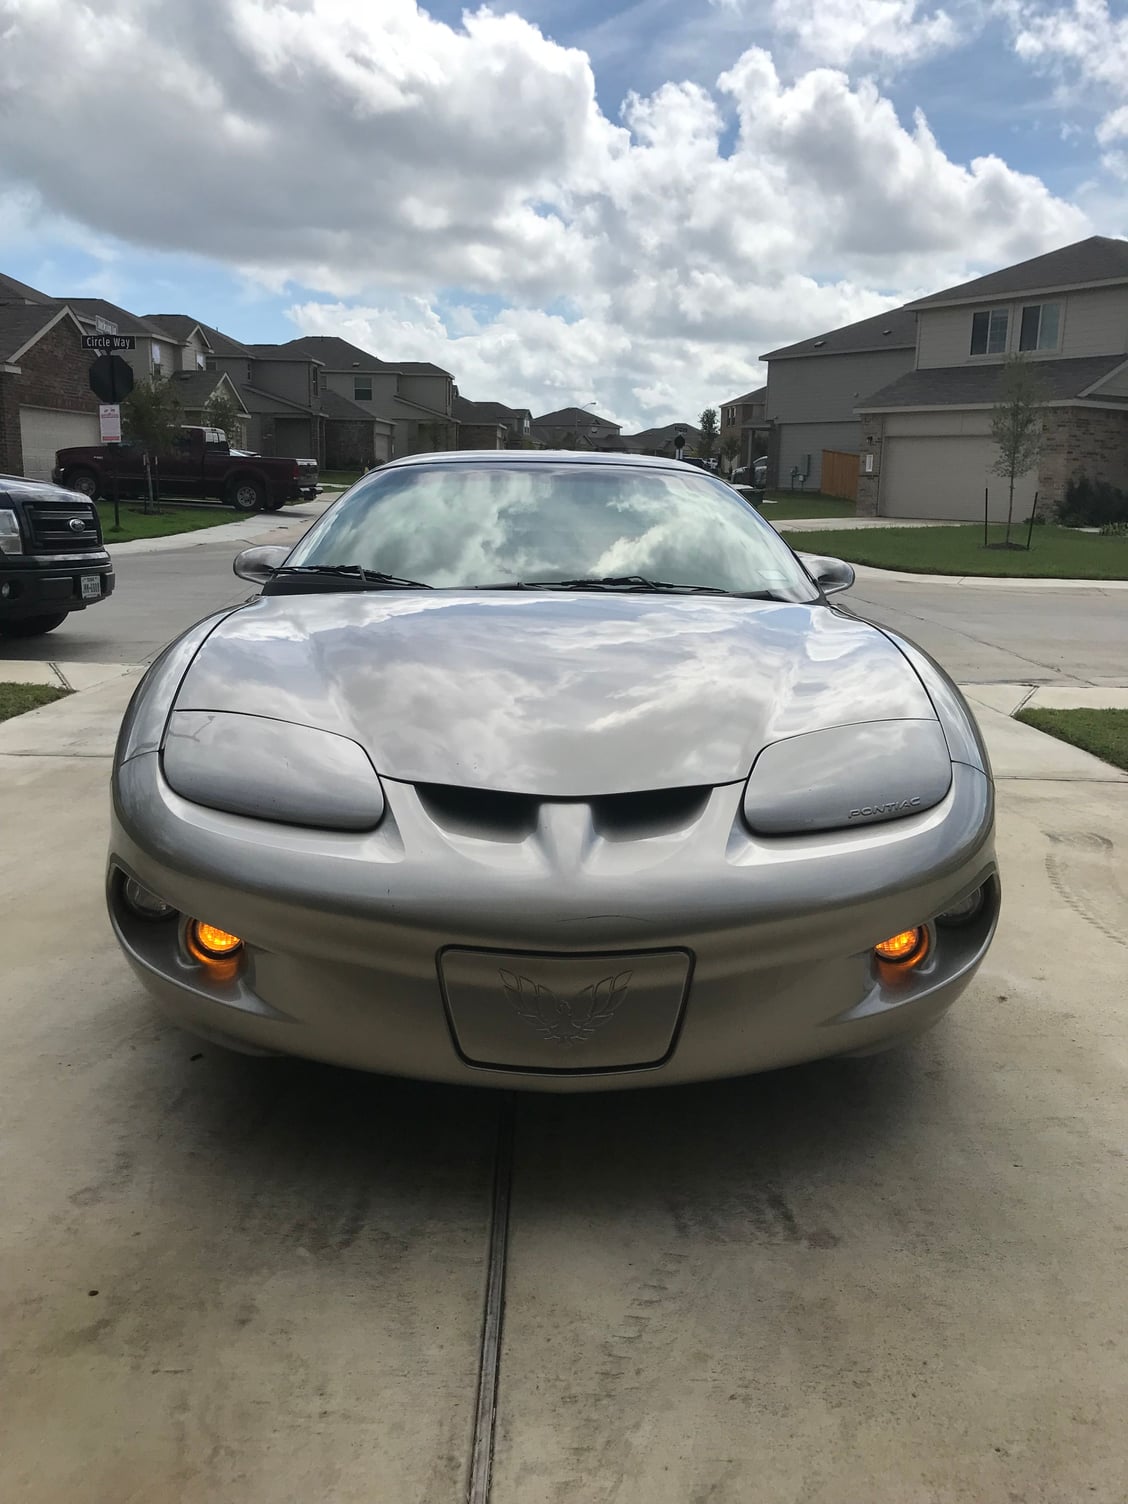 2000 Pontiac Firebird - 2000 Firebird Formula Hard Top - Used - VIN 2g2fv22g8y2152463 - 226,000 Miles - 8 cyl - 2WD - Manual - Coupe - Other - Jarrell, TX 76537, United States